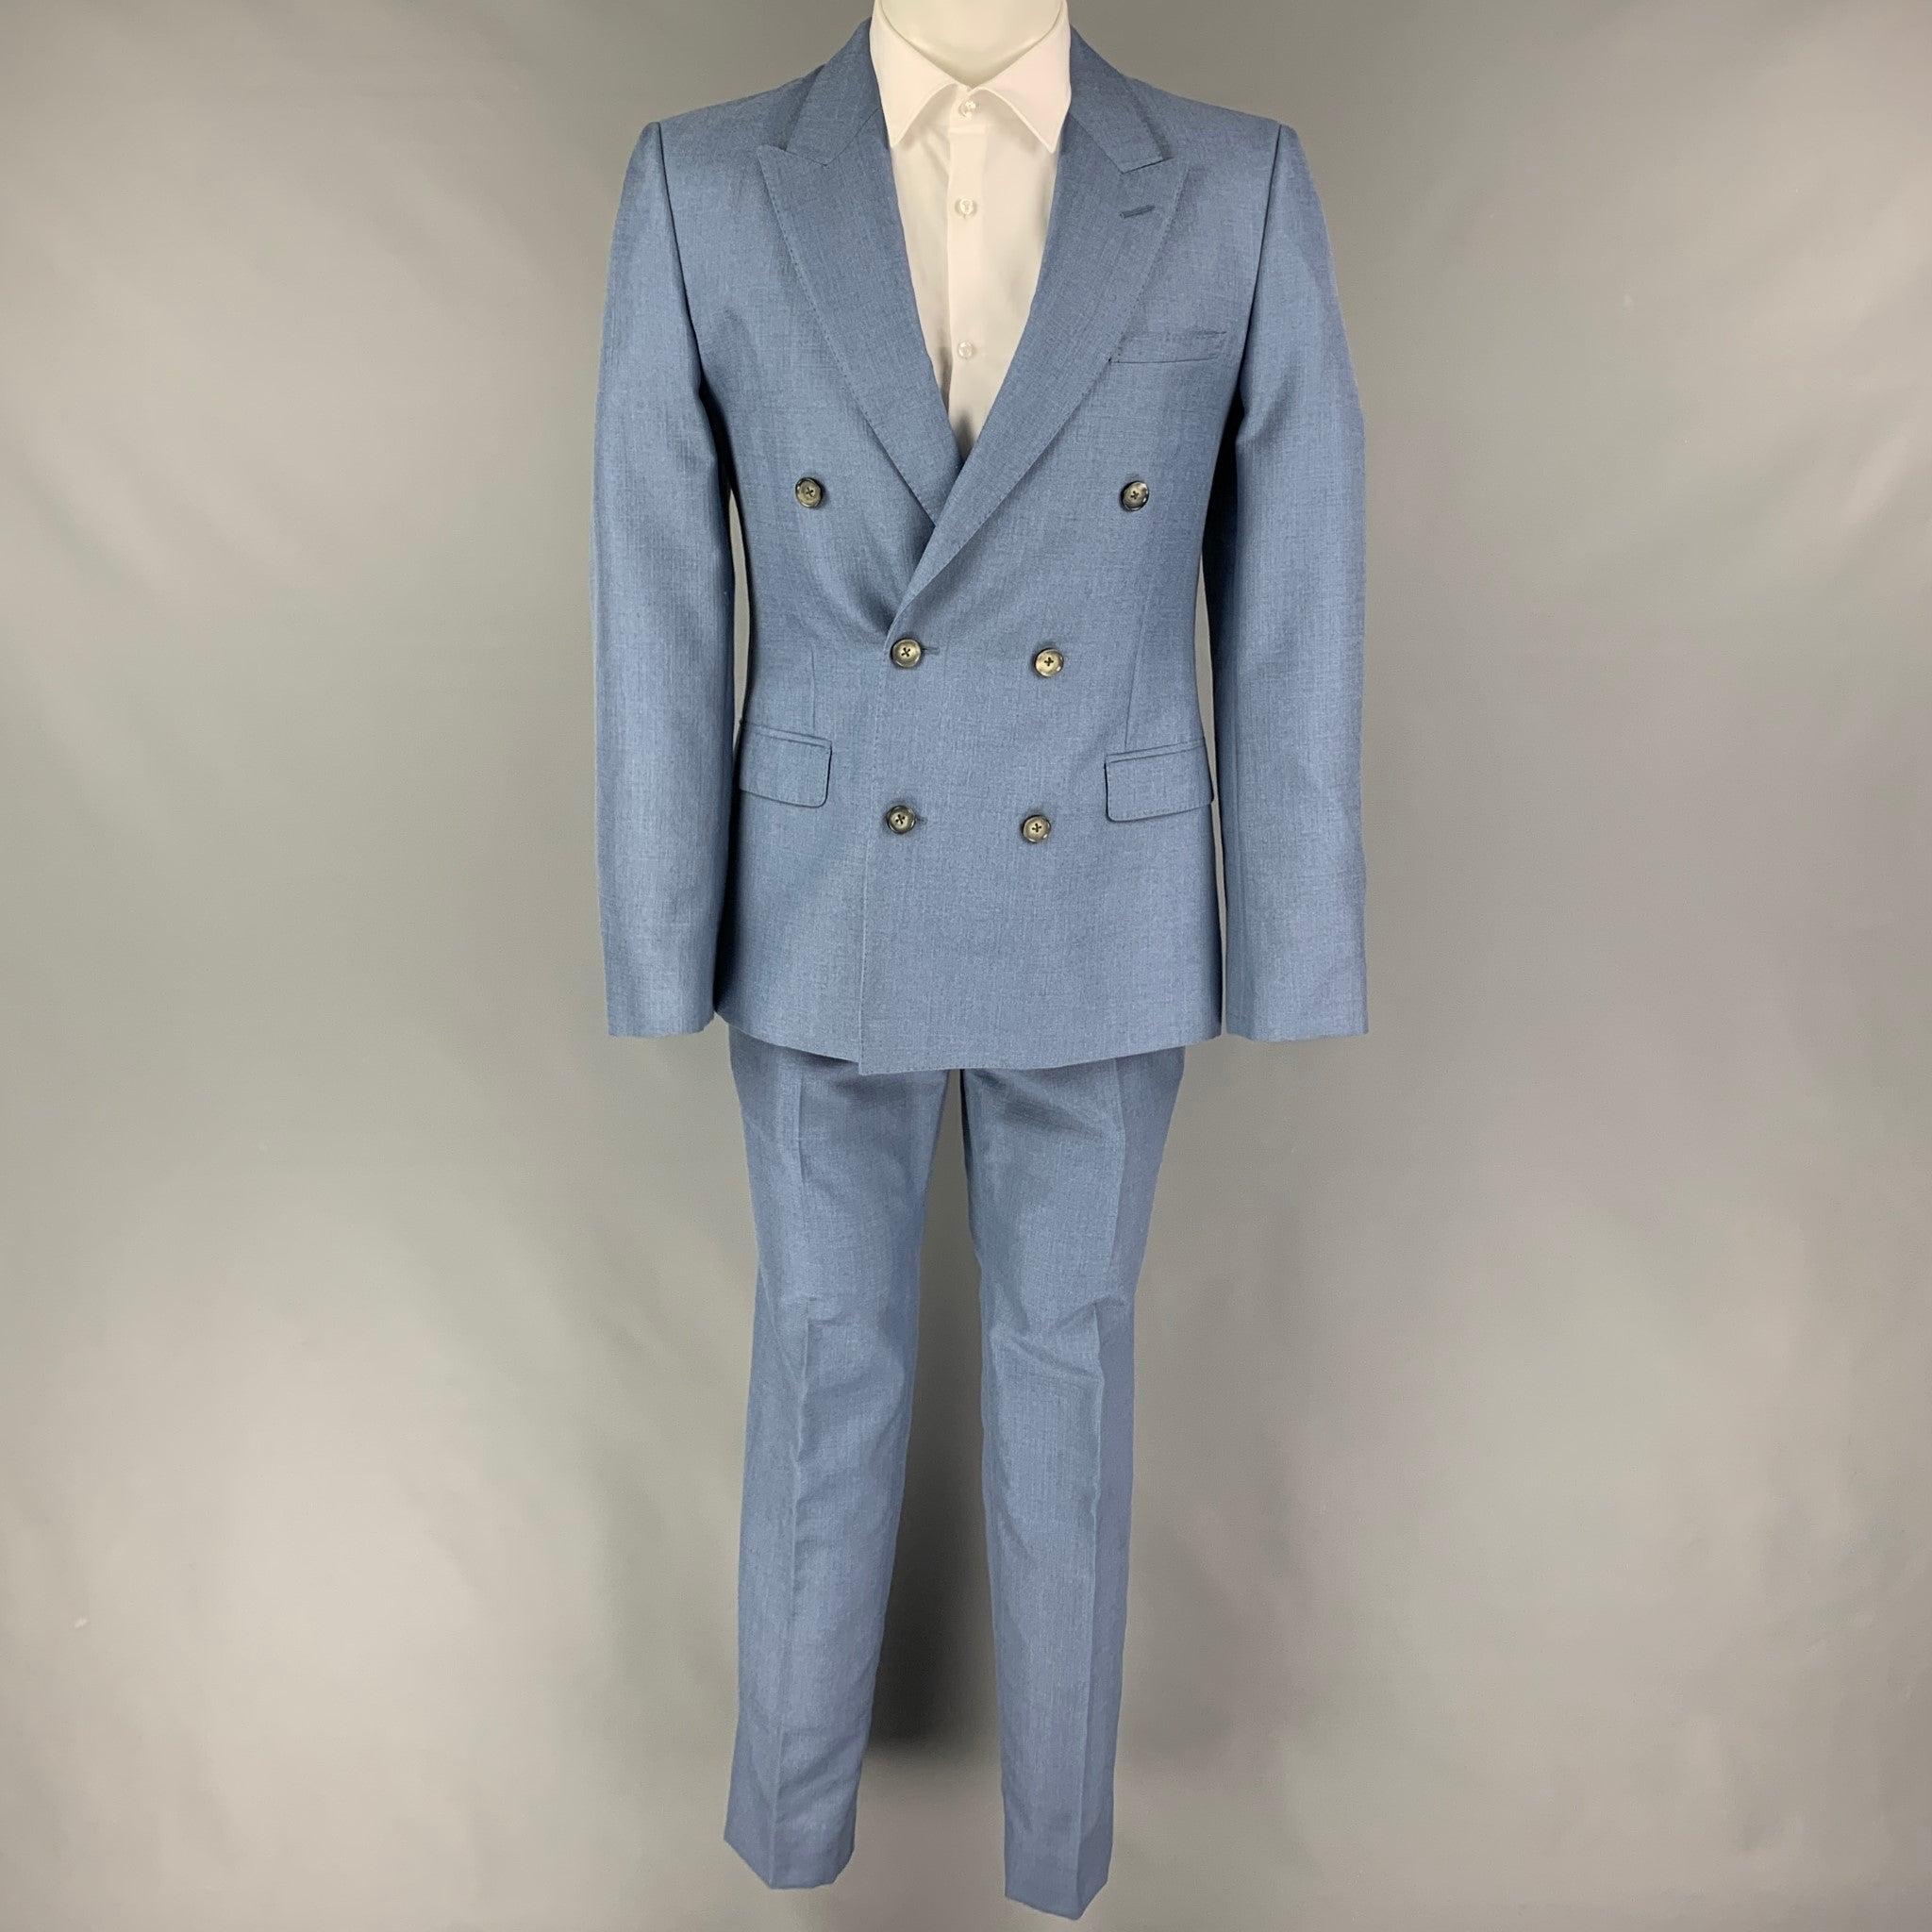 ALEXANDER McQUEEN
suit comes in a blue mohair / silk with a full liner and includes a double breasted sport coat with a peak lapel and matching flat front trousers. Made in Italy. Excellent Pre-Owned Condition. 

Marked:   48 

Measurements: 
 